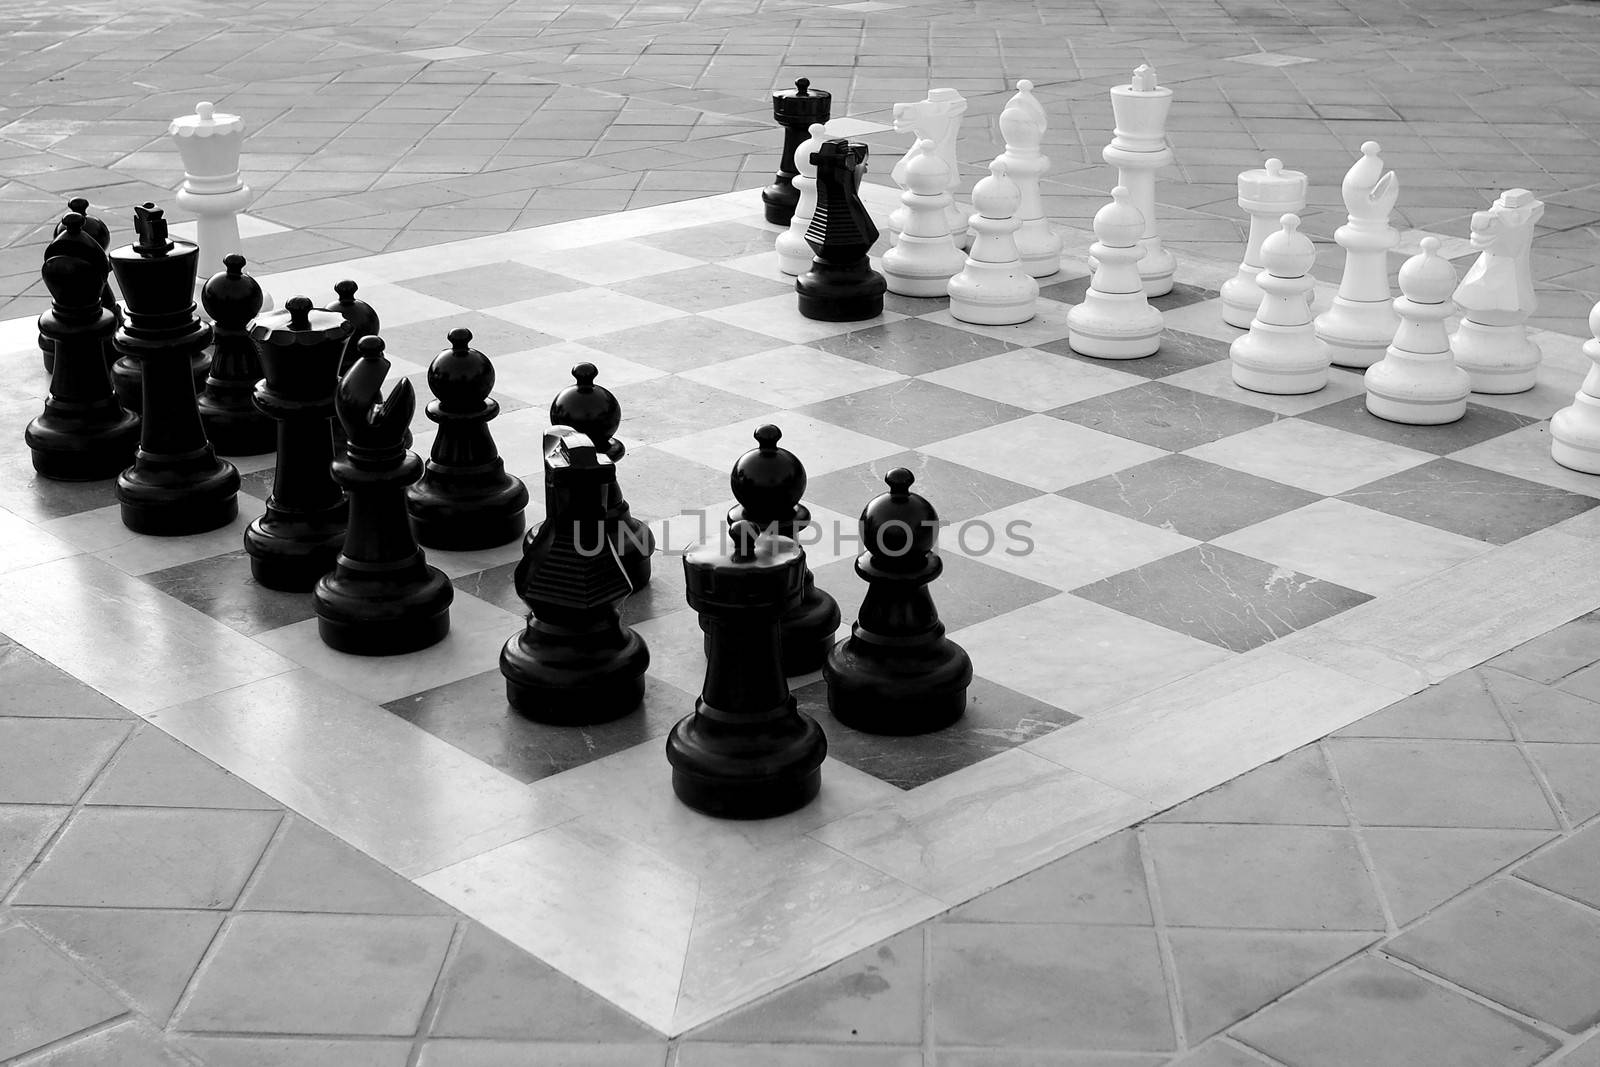 Checkmate! Game over by stockyimages